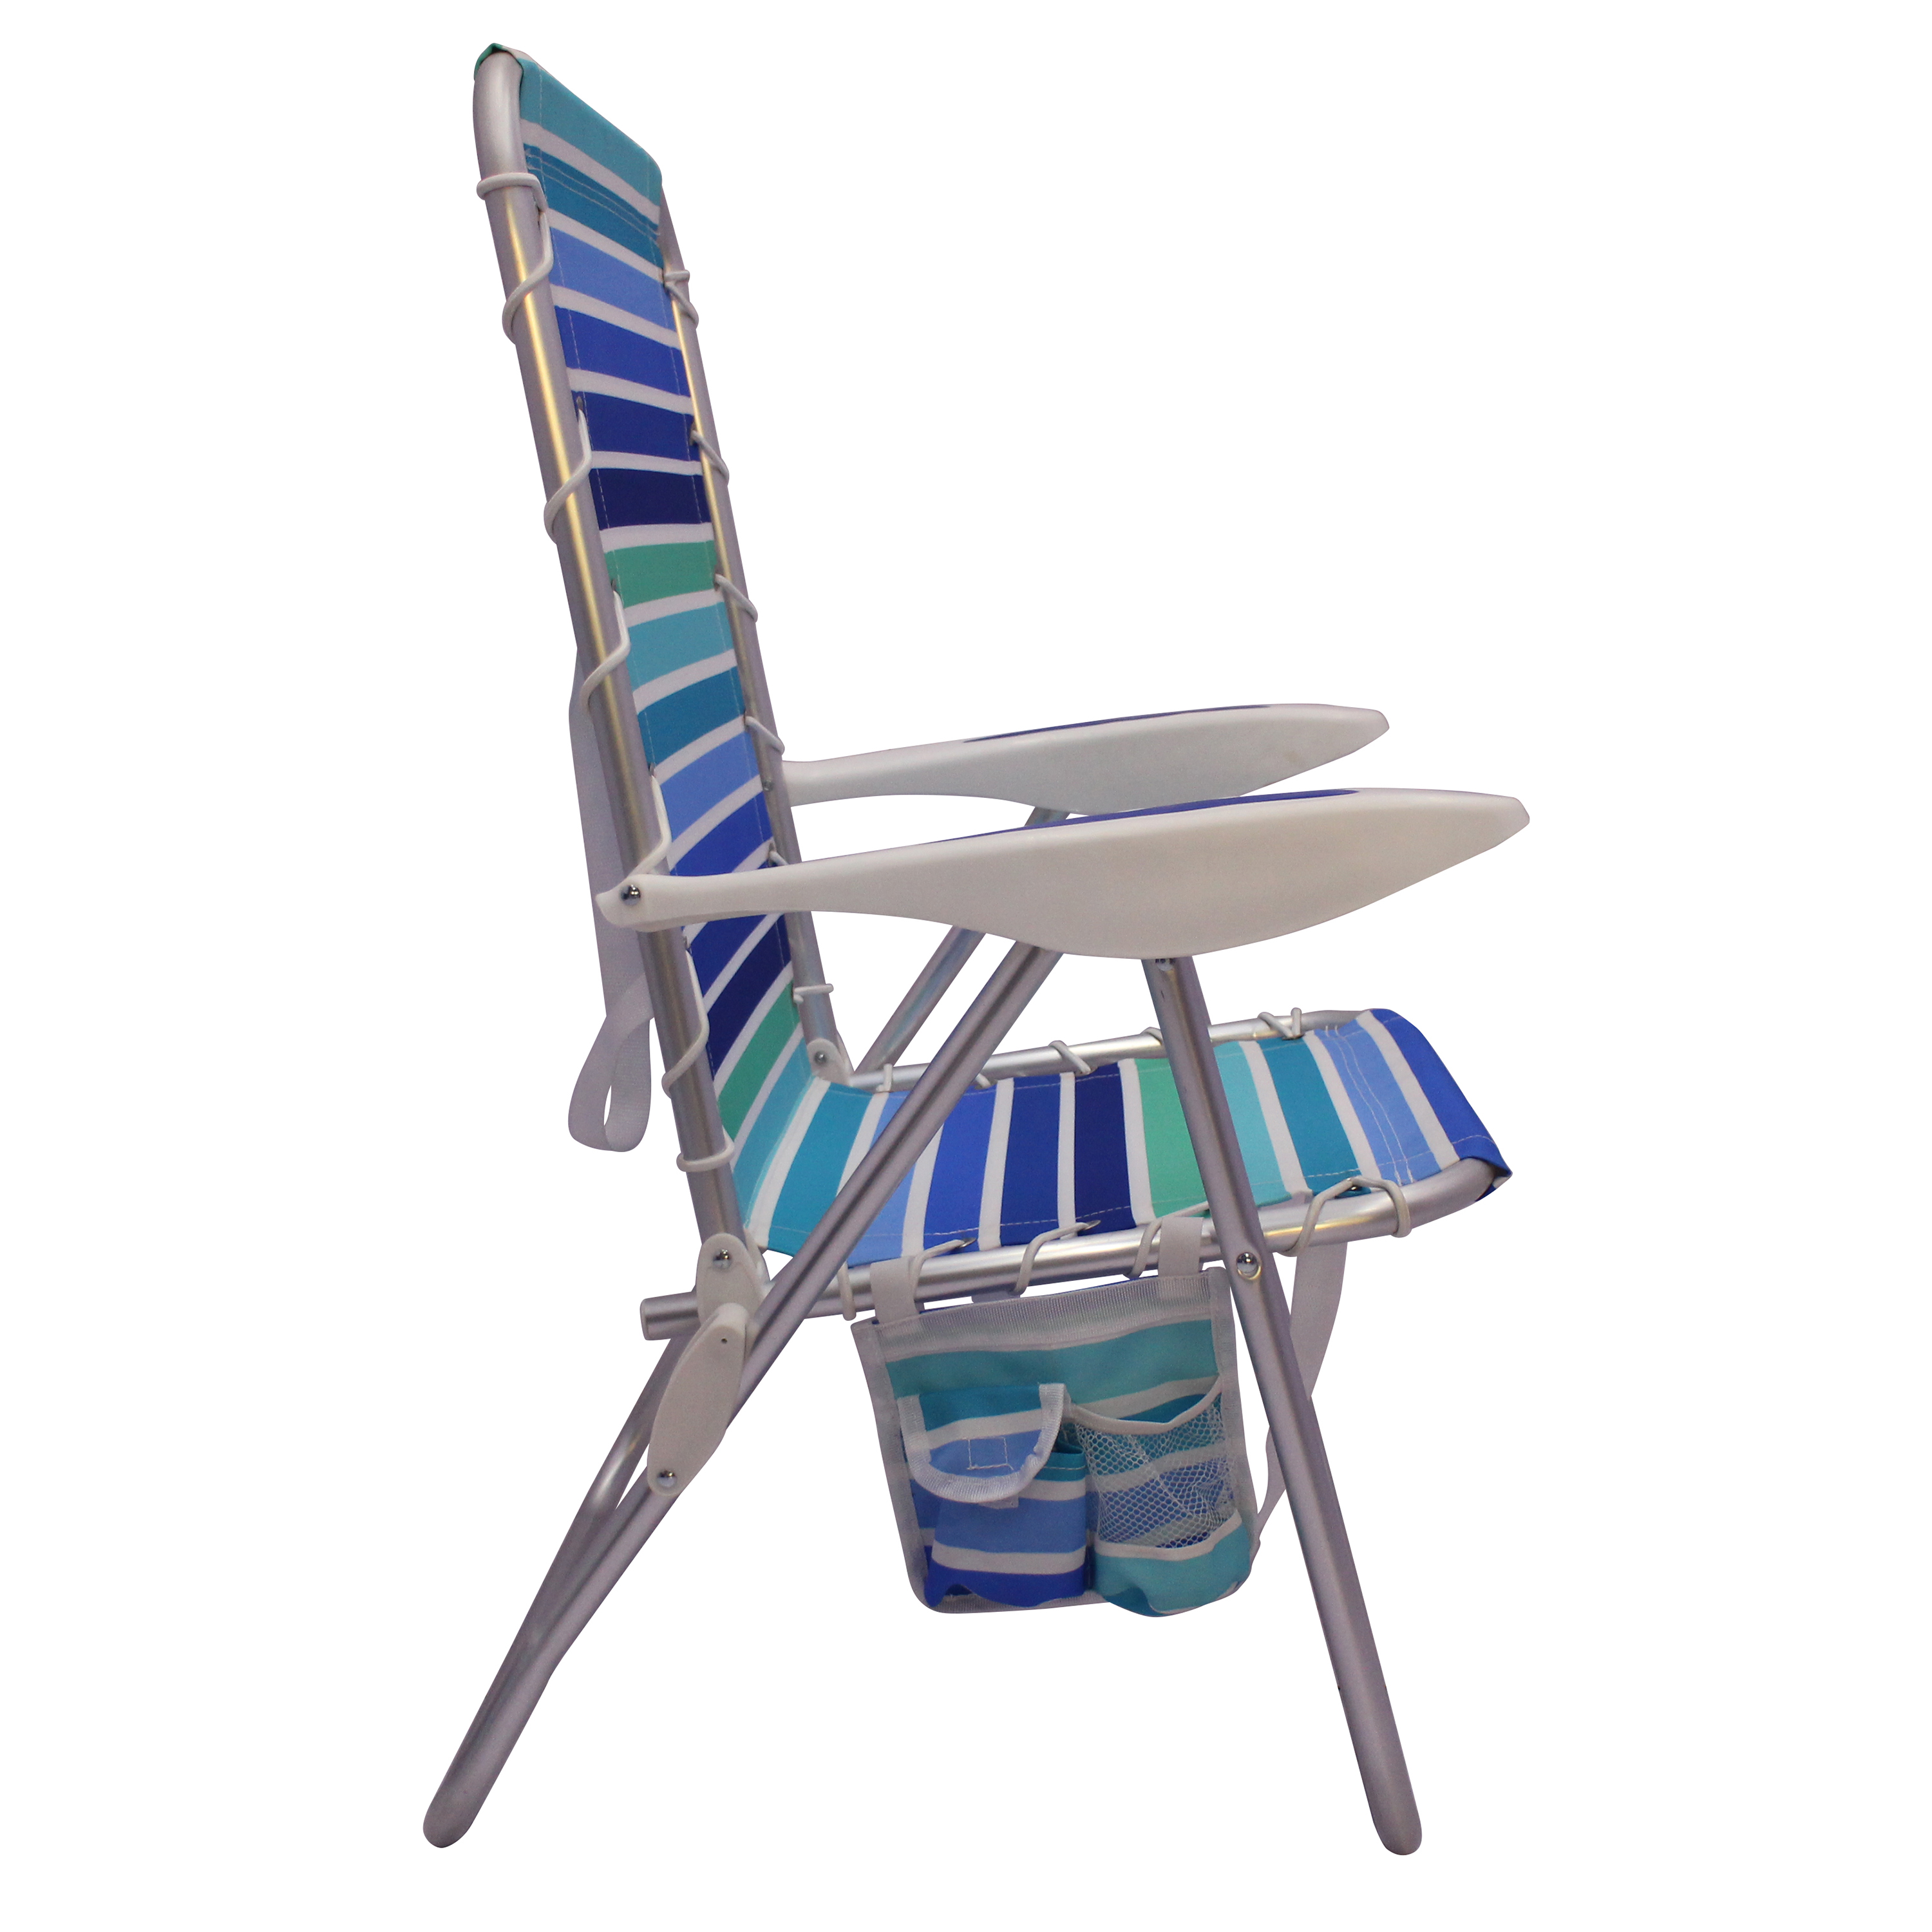 Mainstays Reclining Bungee Beach Chair Blue & Green Stripe - image 4 of 8